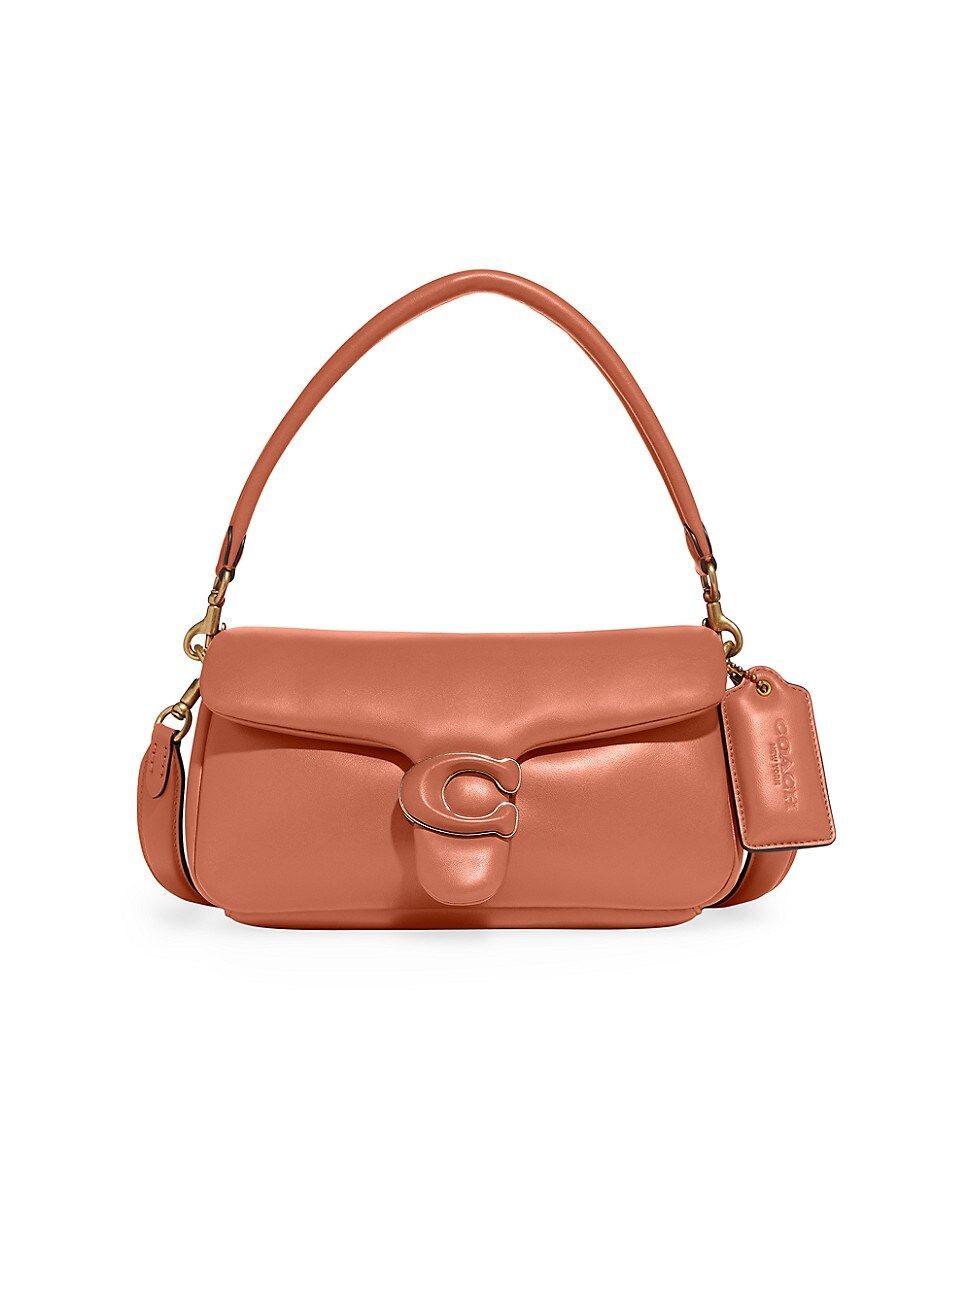 Pillow Tabby 26 Leather Shoulder Bag | Saks Fifth Avenue